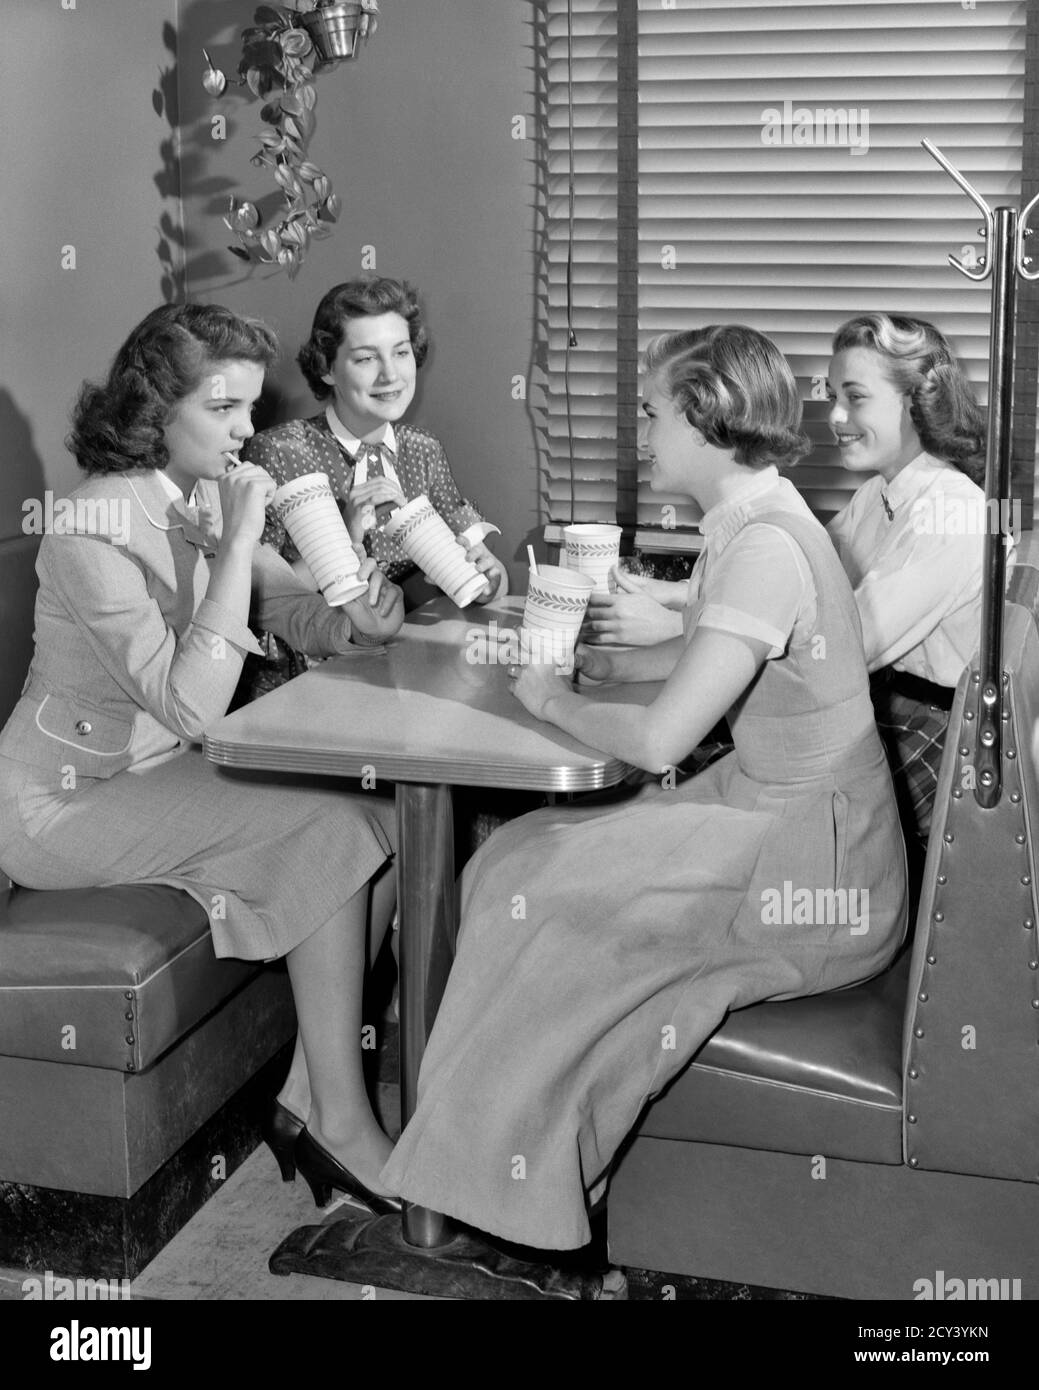 1950s FOUR TEENAGE GIRLS FRIENDS SITTING BOOTH AT SODA FOUNTAIN TALKING DRINKING MILKSHAKES PAPER CUPS PAPER STRAWS  - f6766 HAR001 HARS COMMUNITY DINER SUBURBAN SODA FOUNTAIN URBAN OLD TIME NOSTALGIA OLD FASHION 1 JUVENILE STYLE WELCOME COMMUNICATION YOUNG ADULT MILKSHAKE TEAMWORK JOY LIFESTYLE CELEBRATION FEMALES COPY SPACE FRIENDSHIP FULL-LENGTH LADIES PERSONS TEENAGE GIRL CUPS STRAWS B&W SCHOOLS BOOTH HAPPINESS UNIVERSITIES CHOICE ENJOYING LEADERSHIP RECREATION AT HIGH SCHOOL HIGH SCHOOLS HIGHER EDUCATION CONNECTION CONCEPTUAL MILKSHAKES PARLOR STYLISH COLLEGES ICE CREAM GROWTH JUVENILES Stock Photo